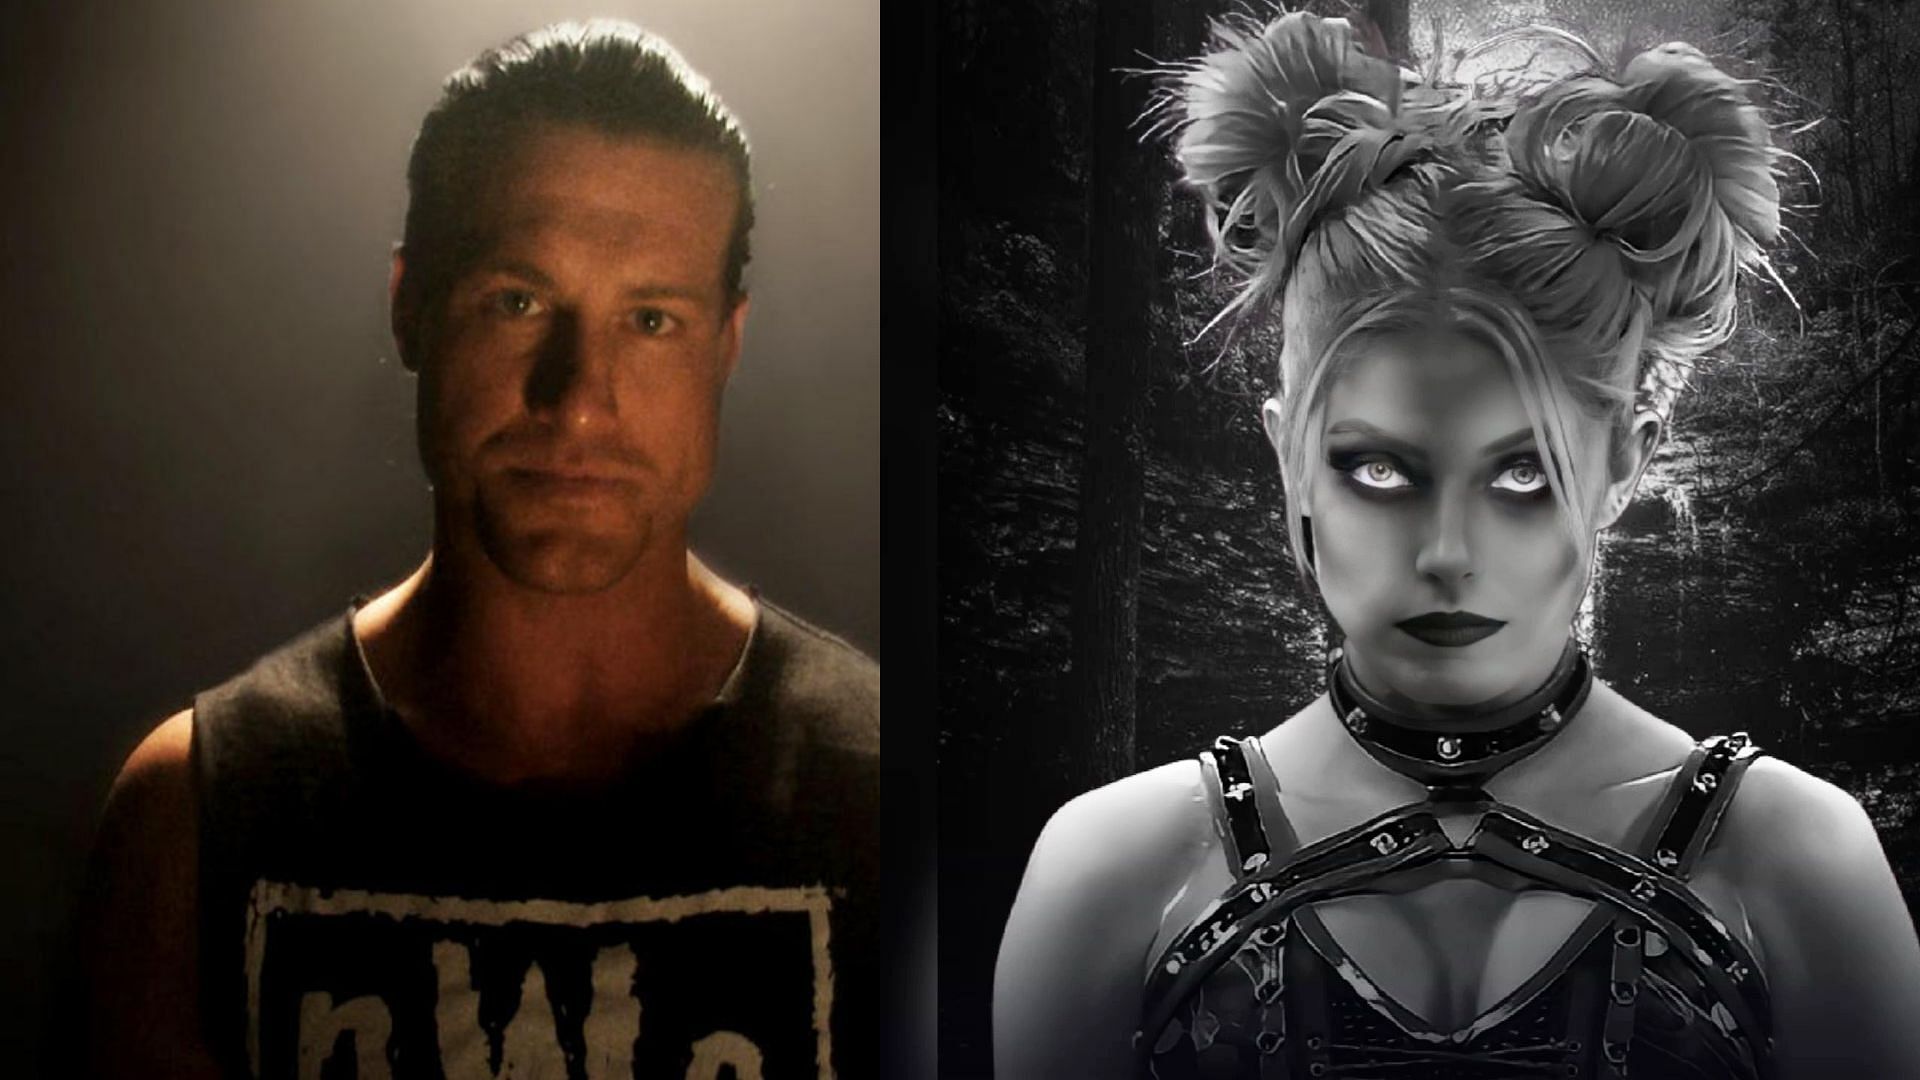 Dolph Ziggler and Alexa Bliss have been involved in some horrifying, scary real-life situations.